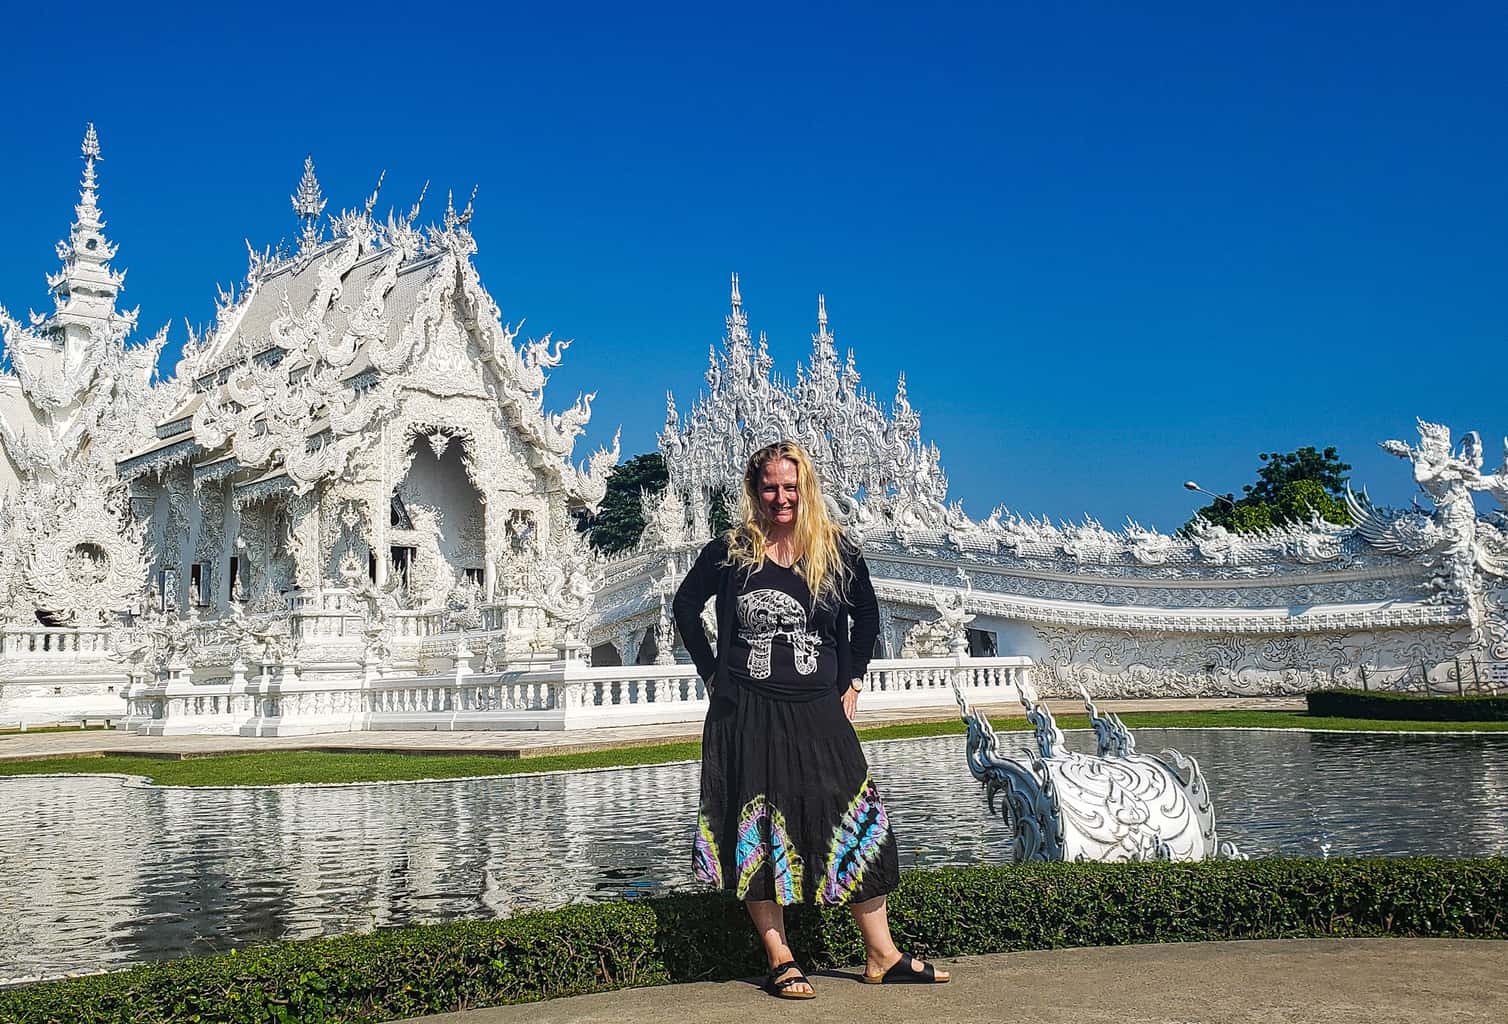 Enjoying the incredible beauty of the White Tample, Wat Rong Khun, In Chiang Rai, Thailand.